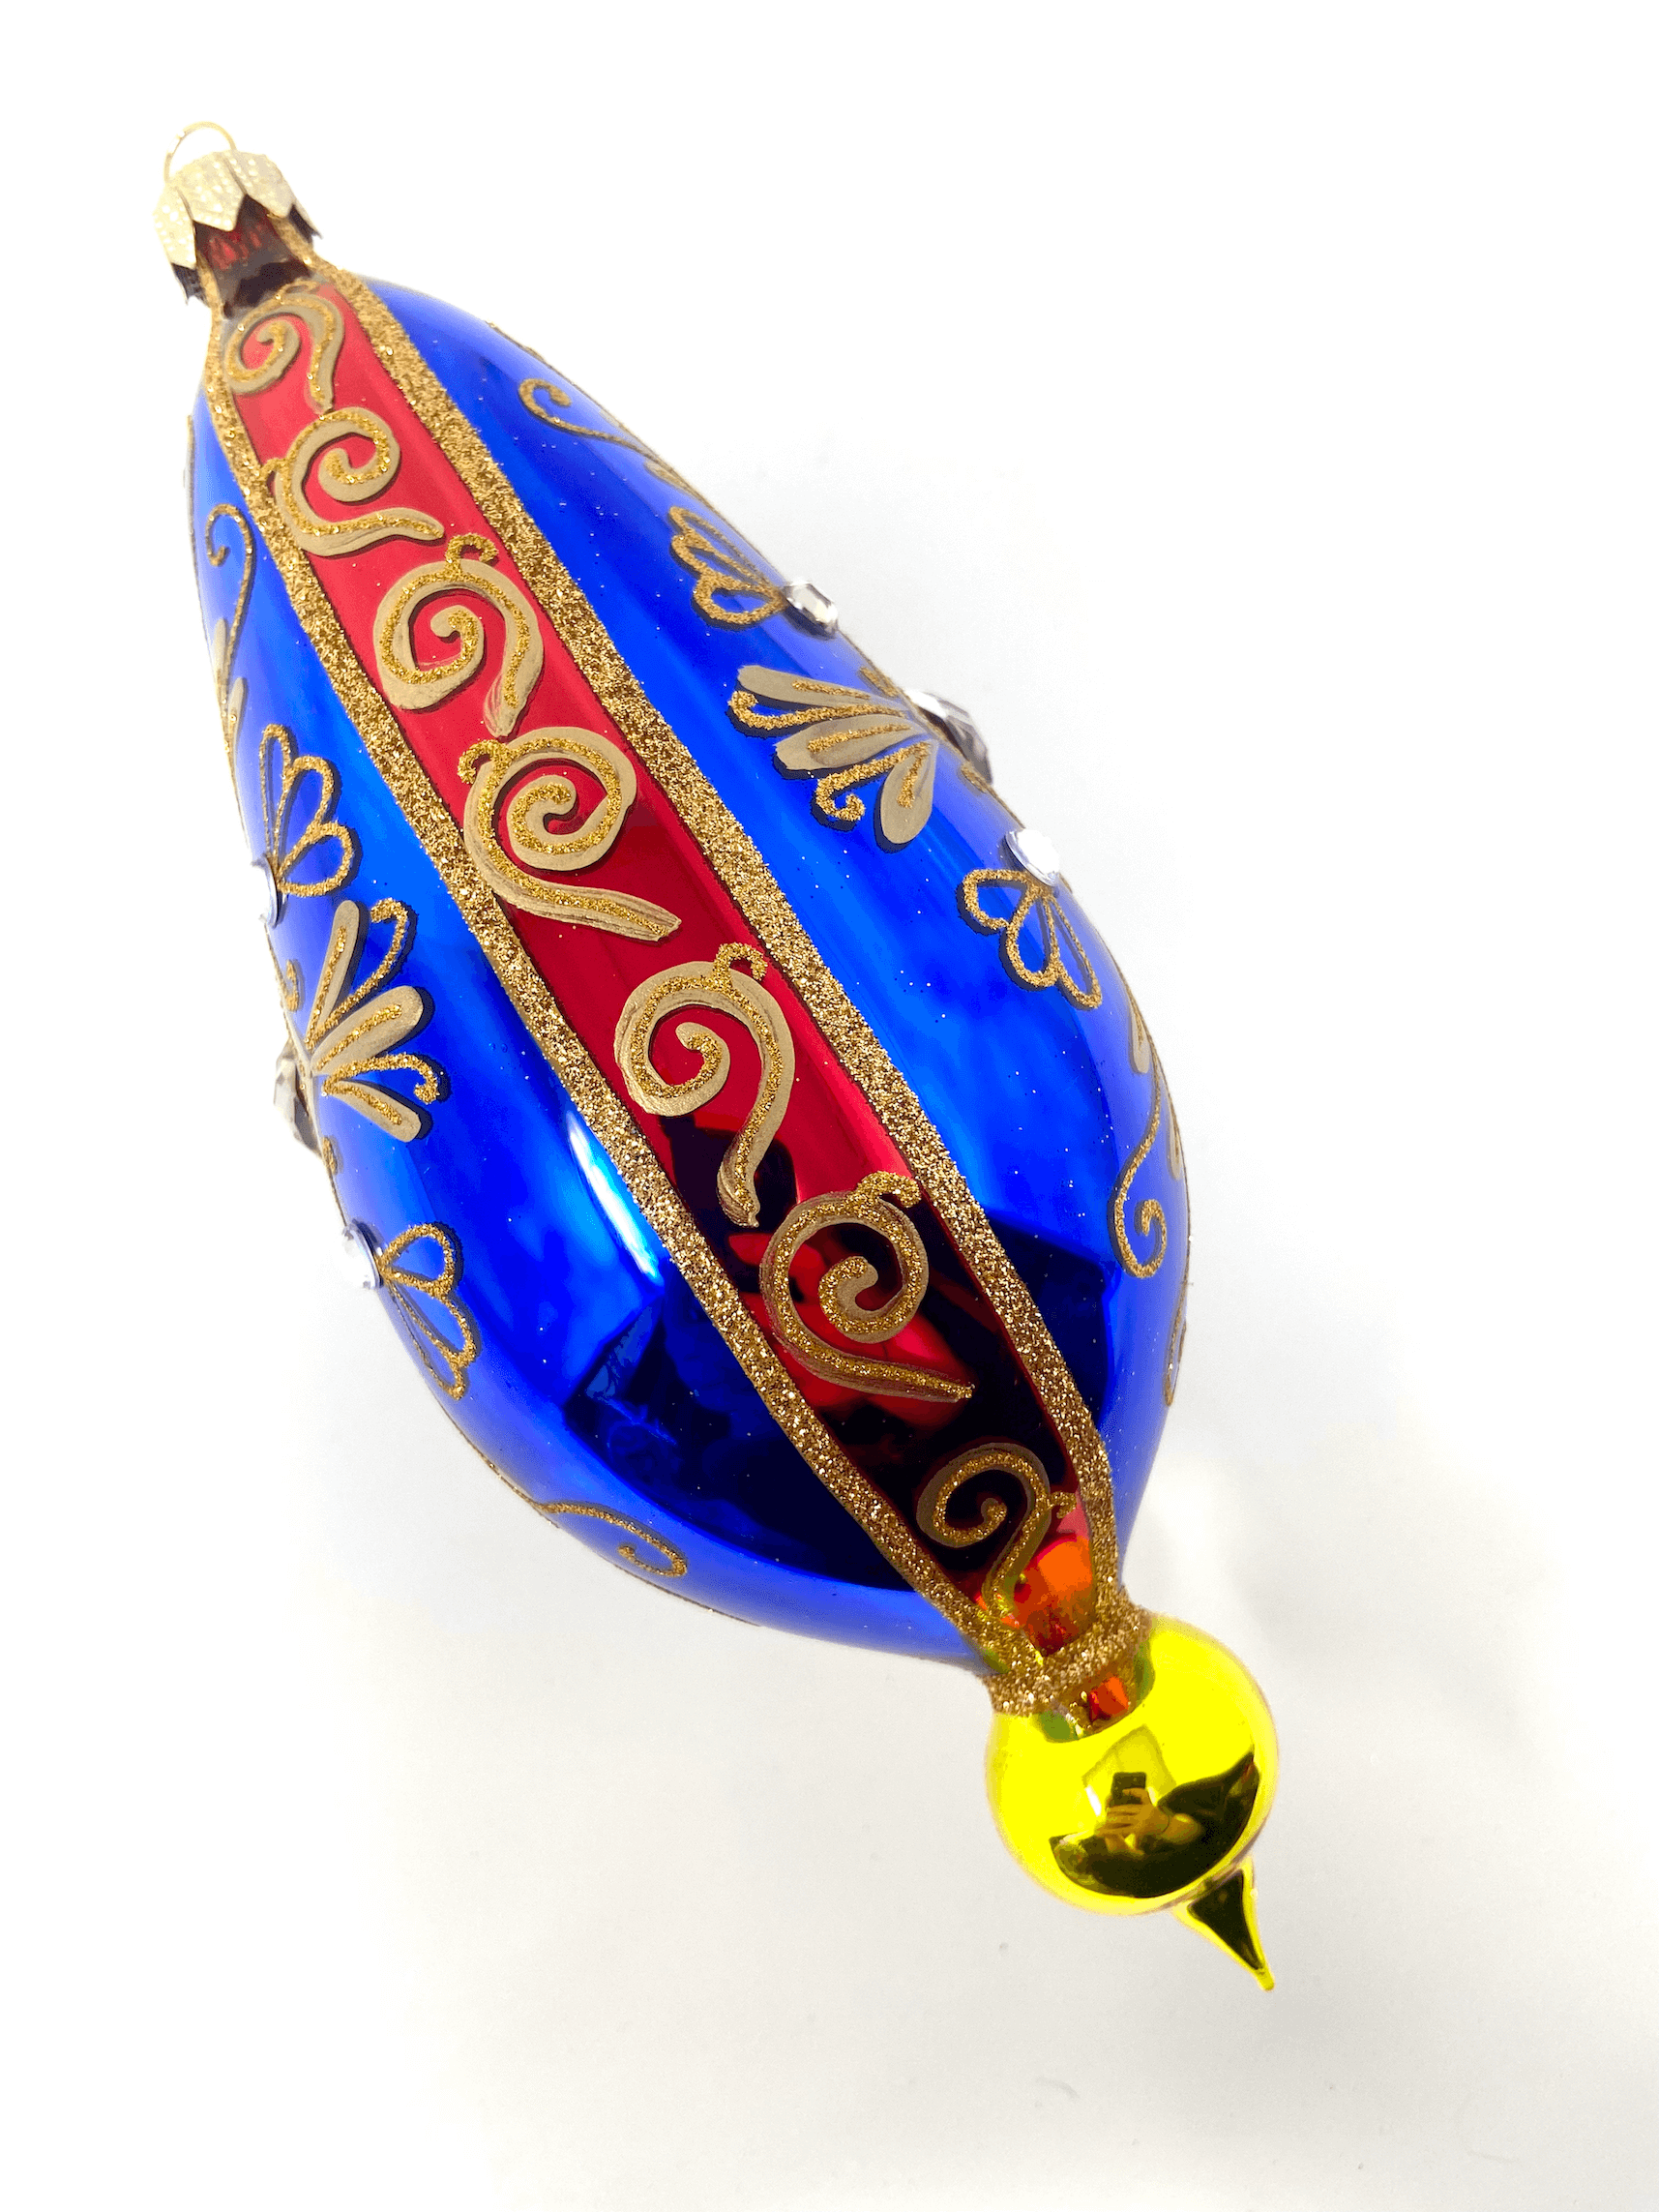 Blue eggplant shaped ornament featuring gemstones, intricate gold detailing, and hand painted floral blooms. A Christmas polish glass ornament. Floral Escape Floral Fetish.